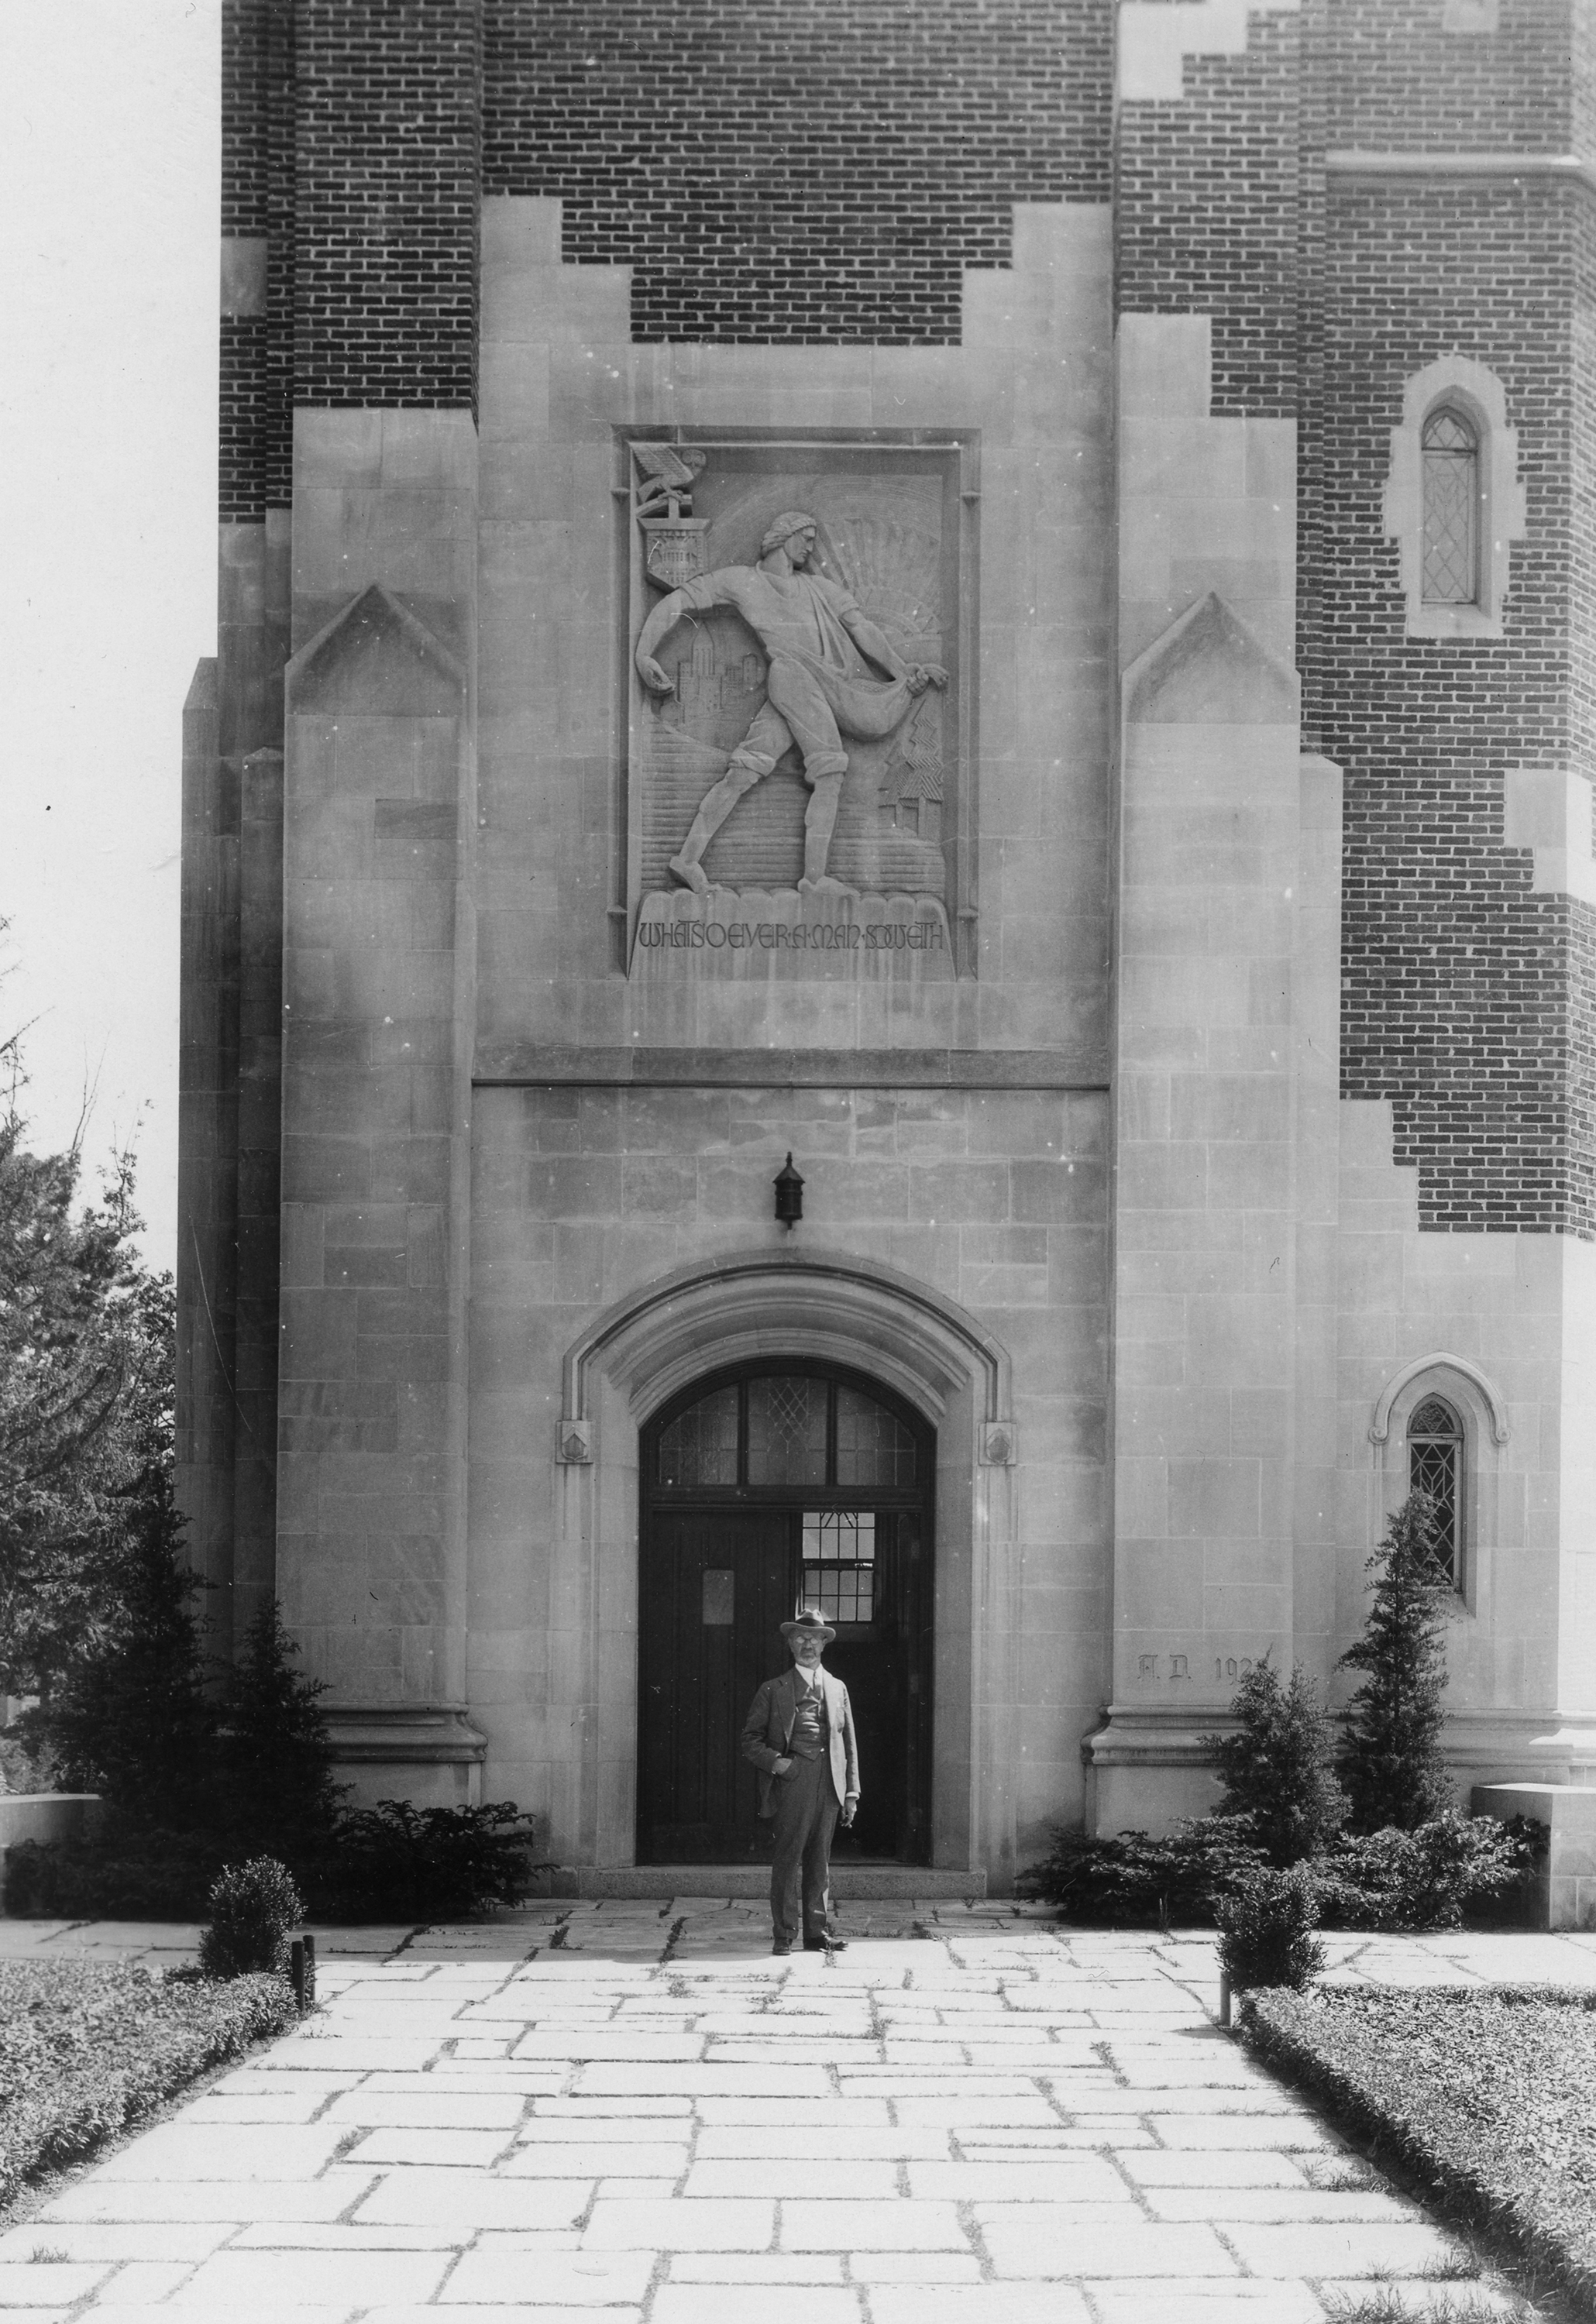 John Donaldson and Beaumont Tower, 1932